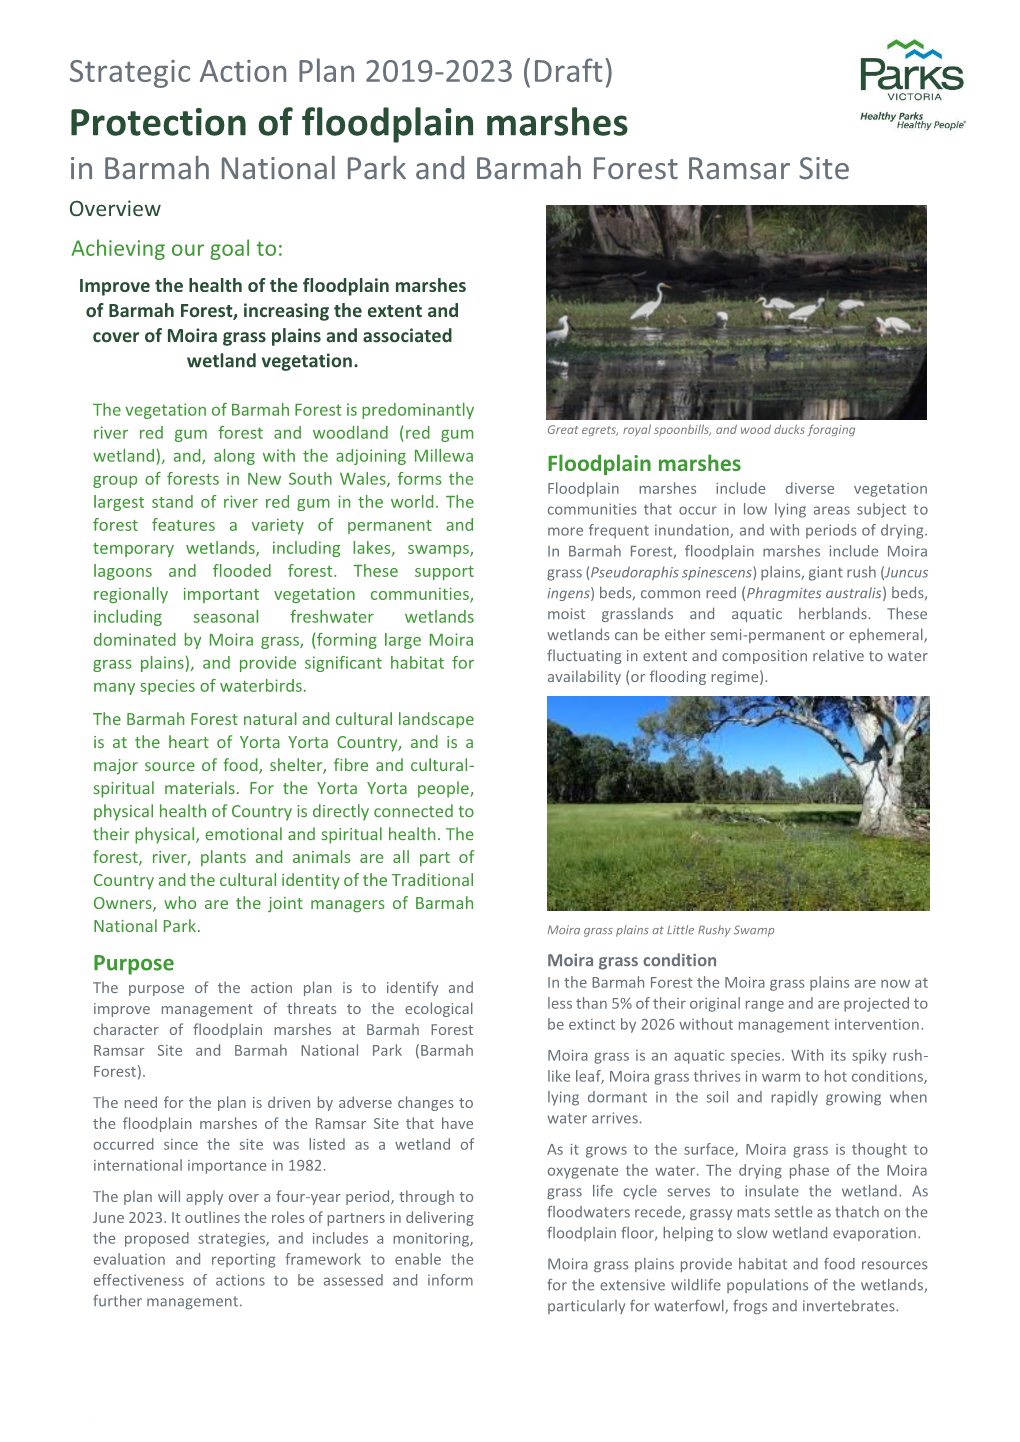 Protection of Floodplain Marshes in Barmah National Park and Barmah Forest Ramsar Site Overview Achieving Our Goal To